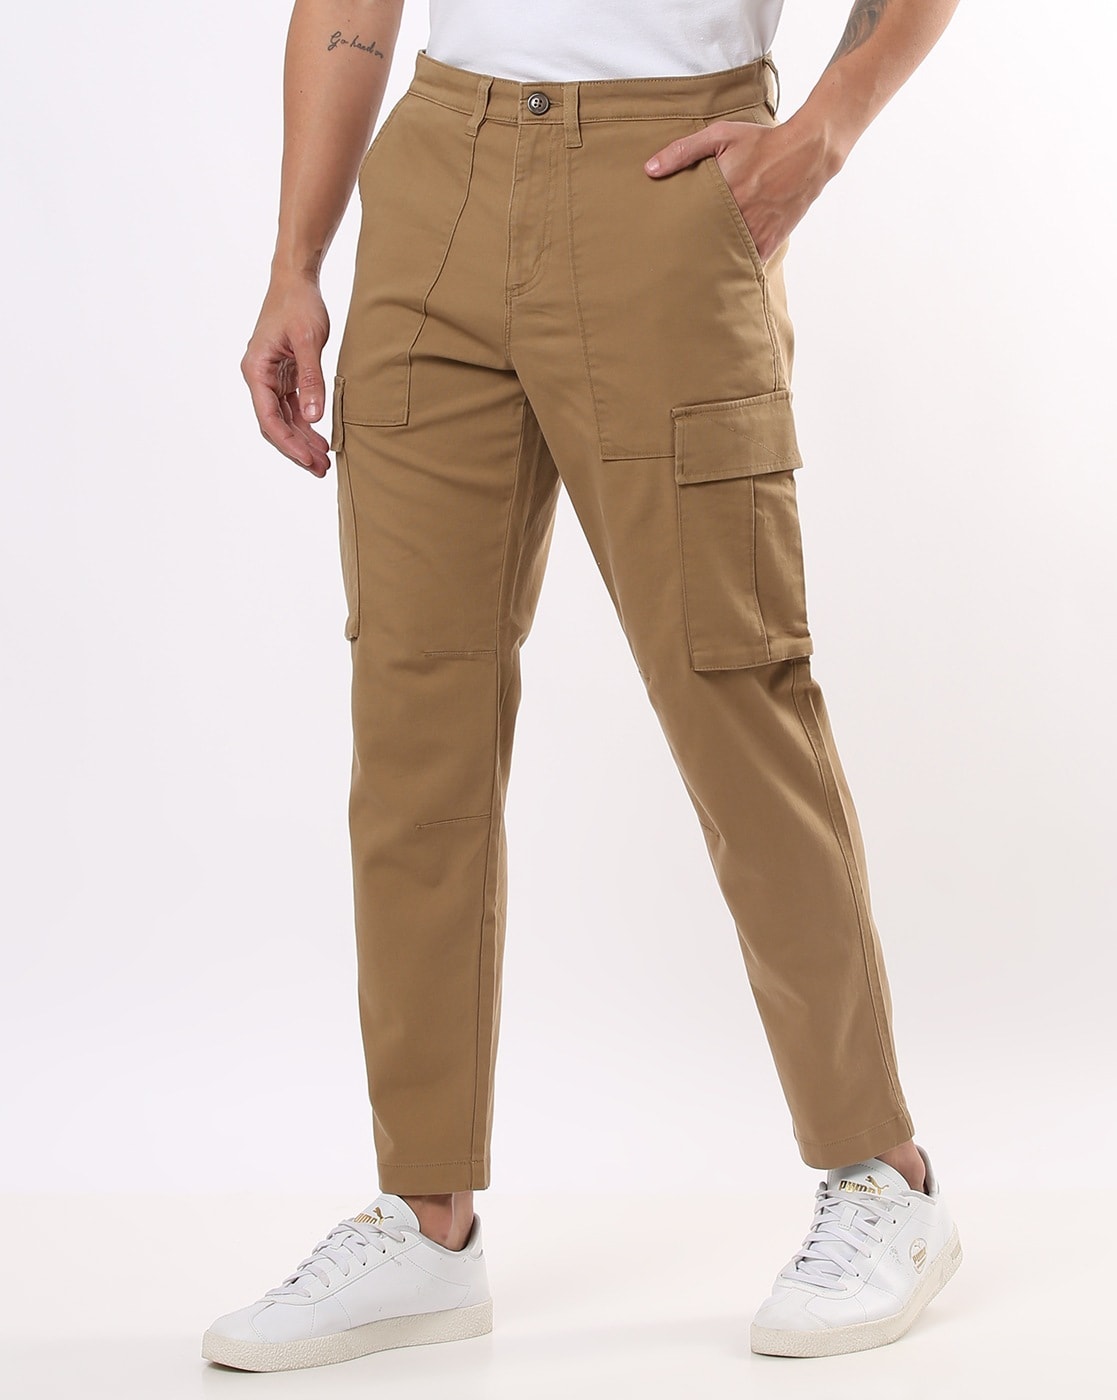 Manfinity Hypemode Men Patched Detail Flap Pocket Cargo 57 OFF